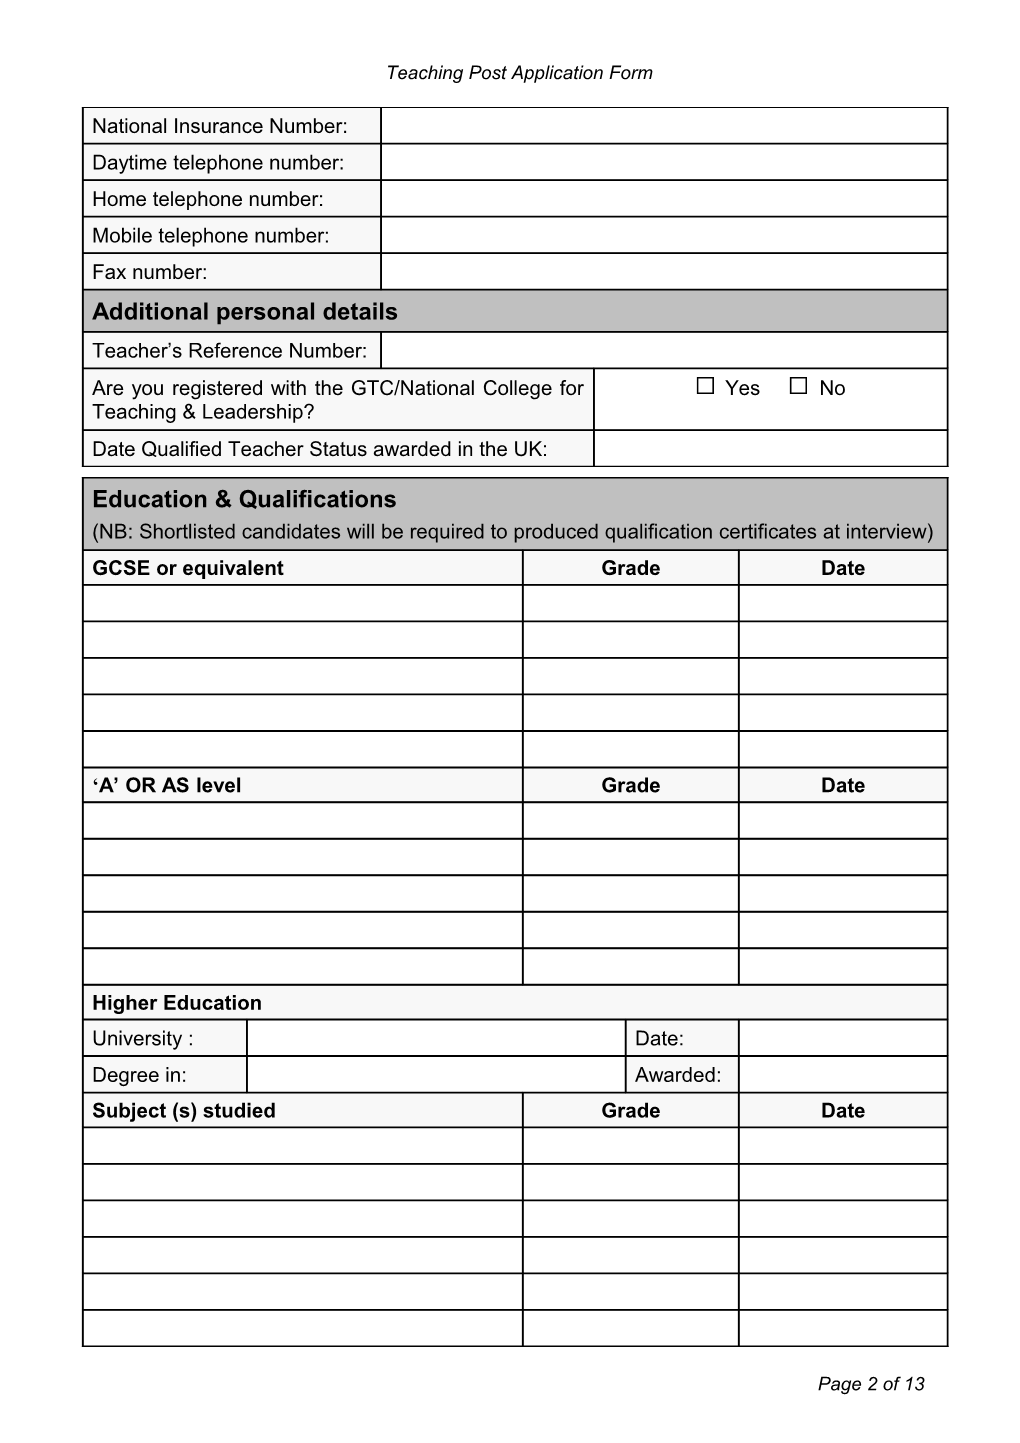 Application Form for a Teaching Post s3